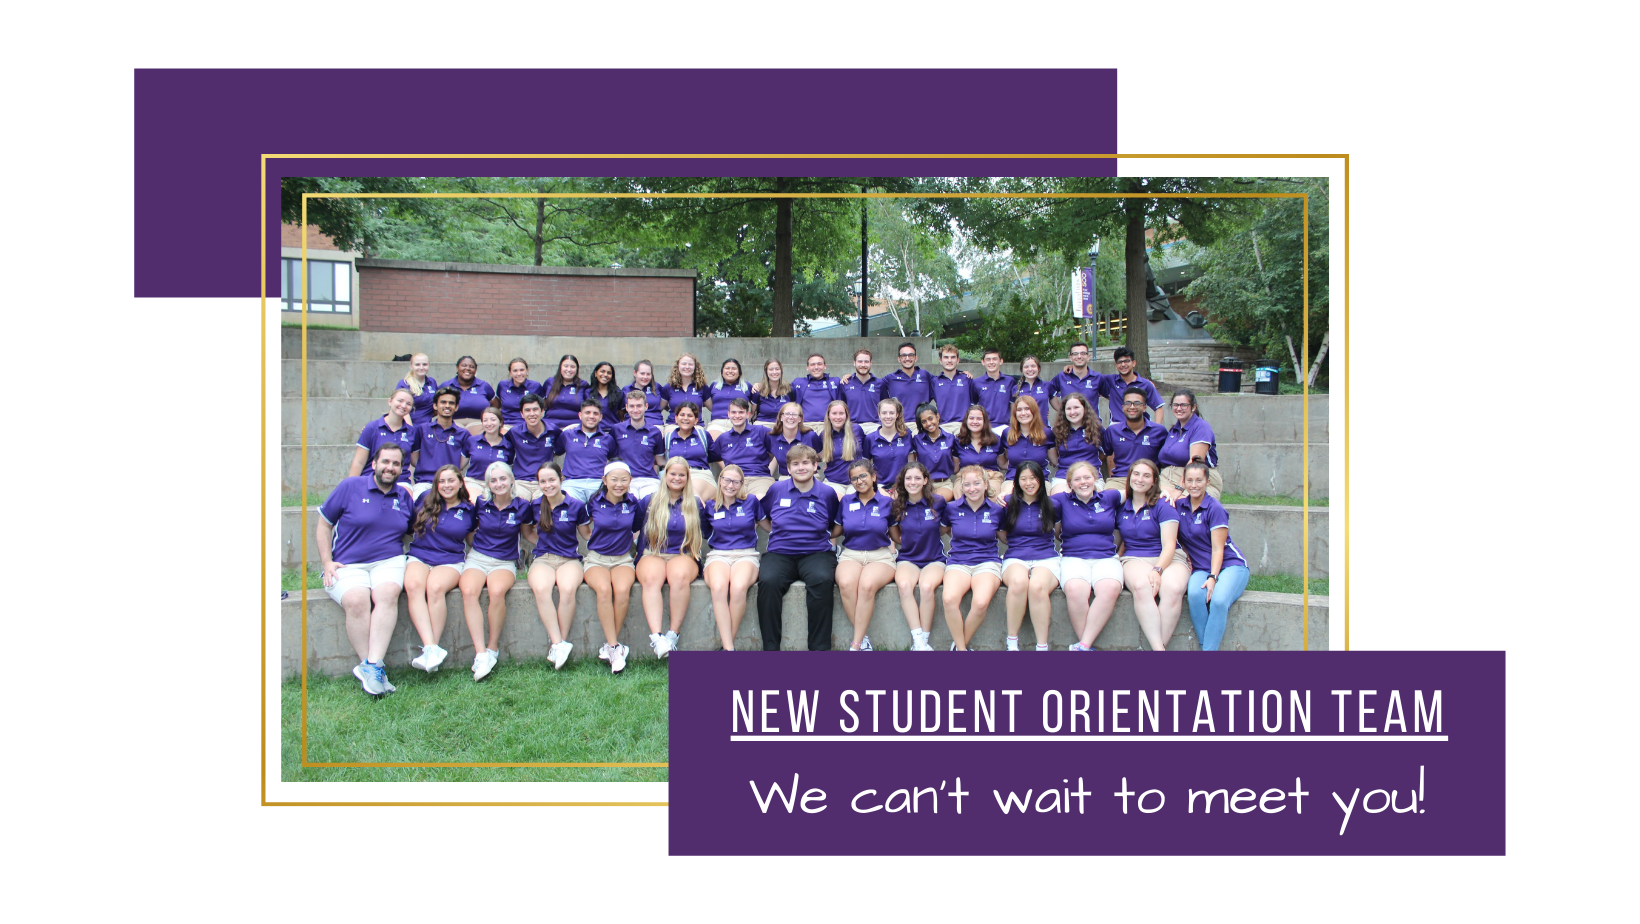 New Student Orientation team, we can't wait to meet you!